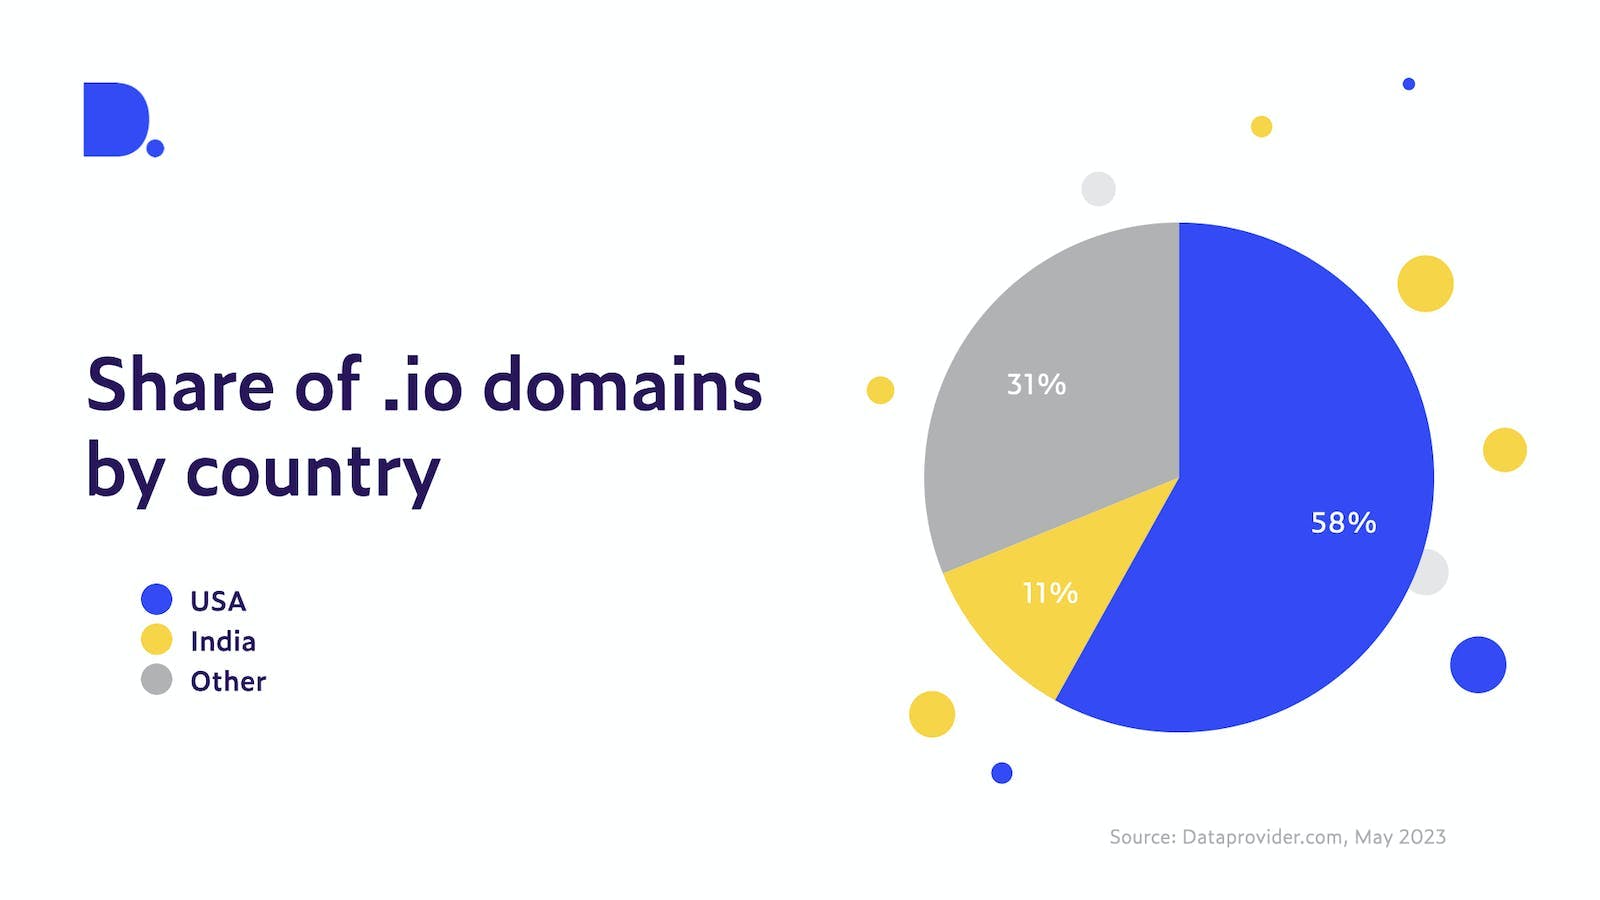 Percentage of active .io domains by country (Source: Dataprovider.com)